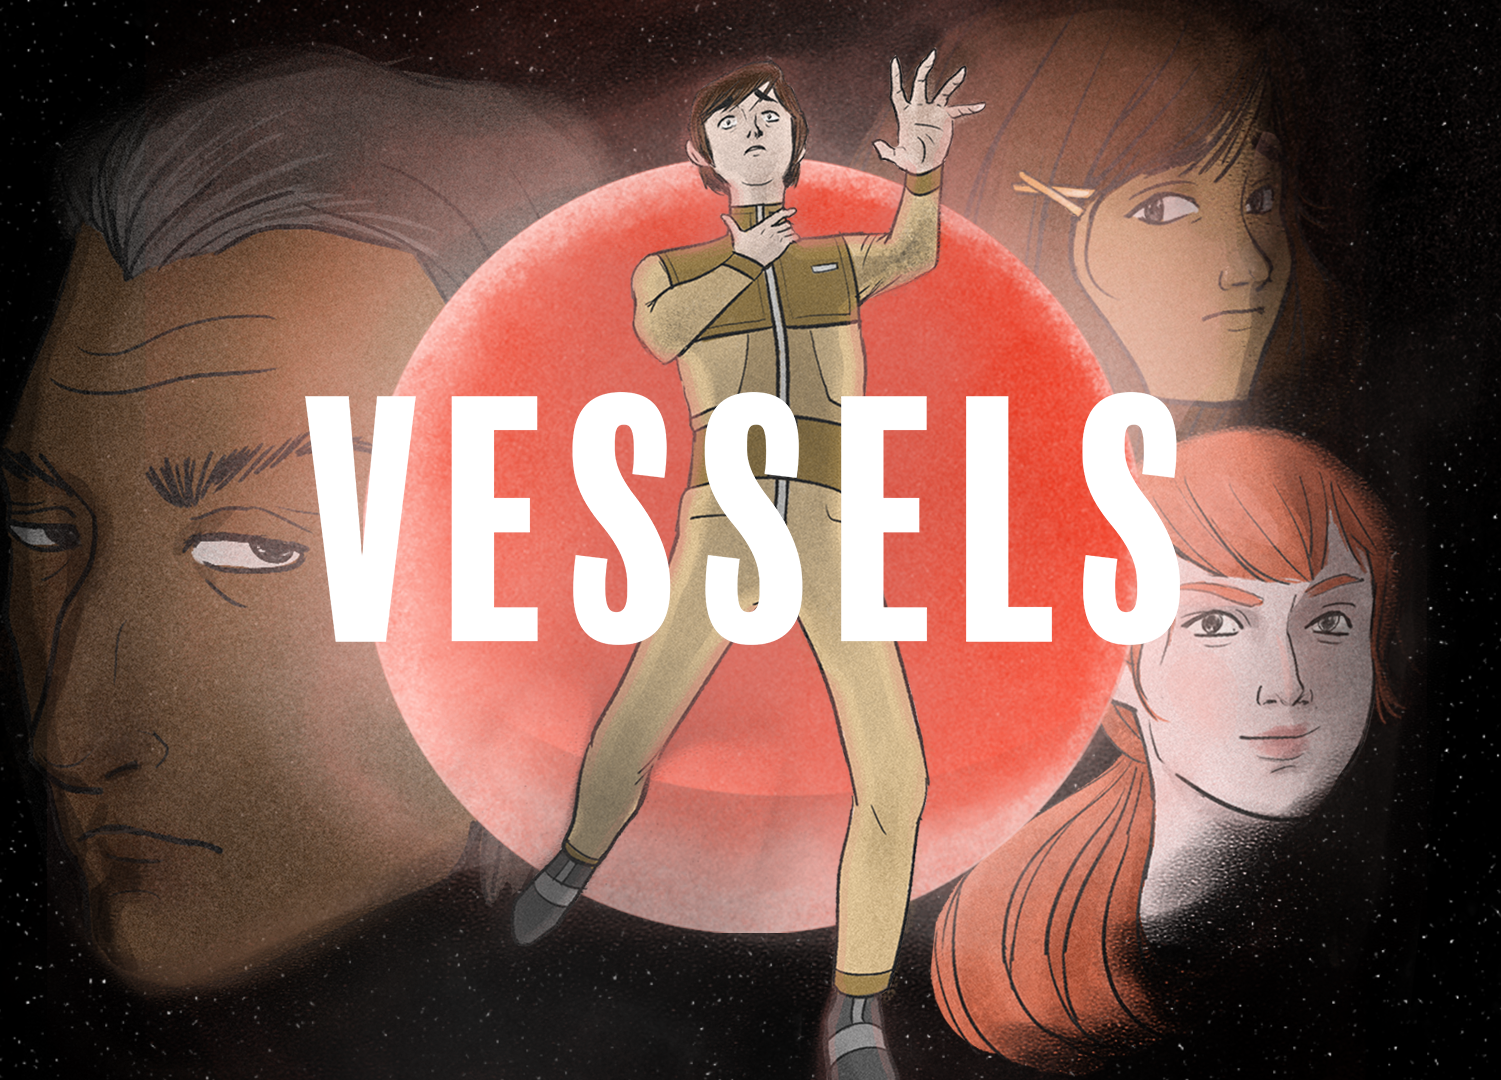 A square promotional image for Vessels. The image shows the title Vessels in white text with a game character floating behind the title gasping for breath with 3 disembodied heads of other game characters in the background.